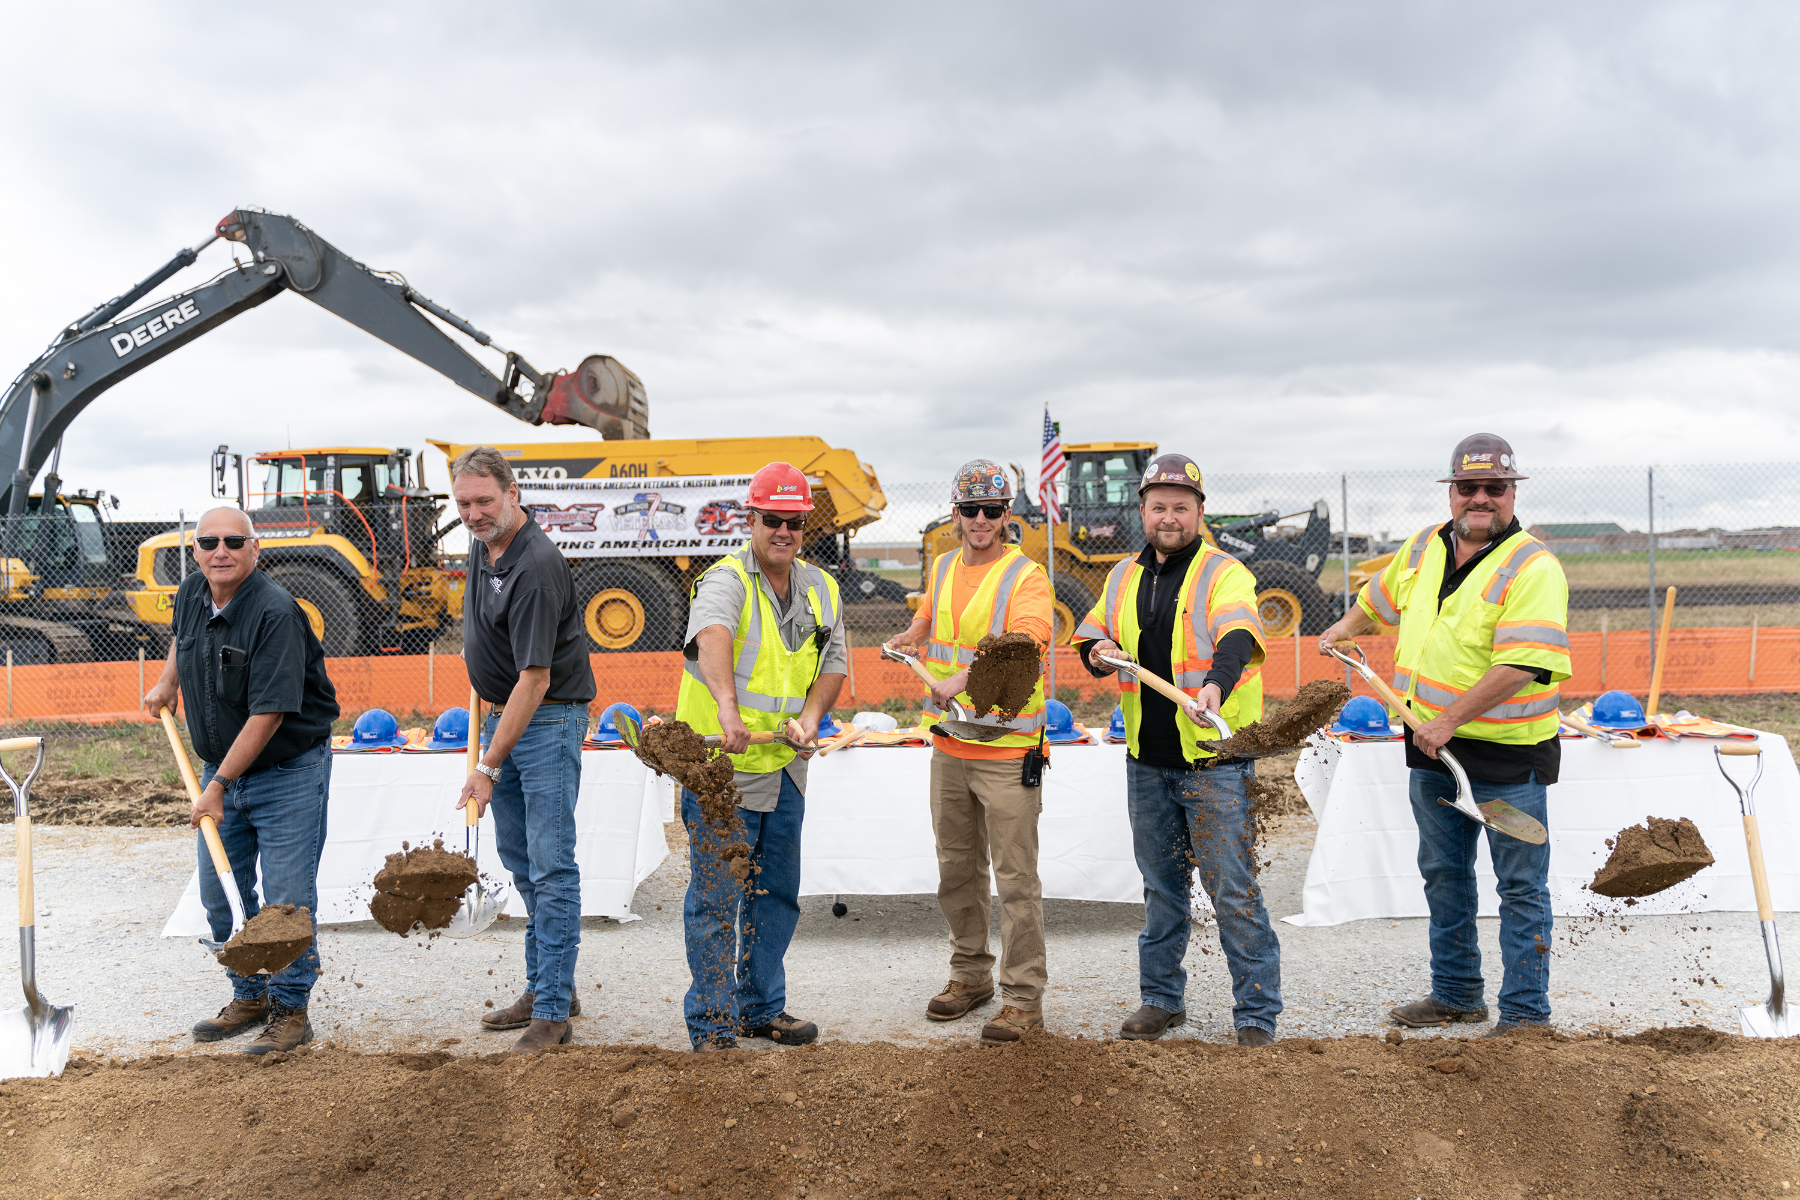 A groundbreaking was held on Thursday, Sep. 28, 2023 for the new $1.4 Billion correctional facility under construction in Westville, Indiana. SCOTT ROBERSON | Indiana Department of Correction